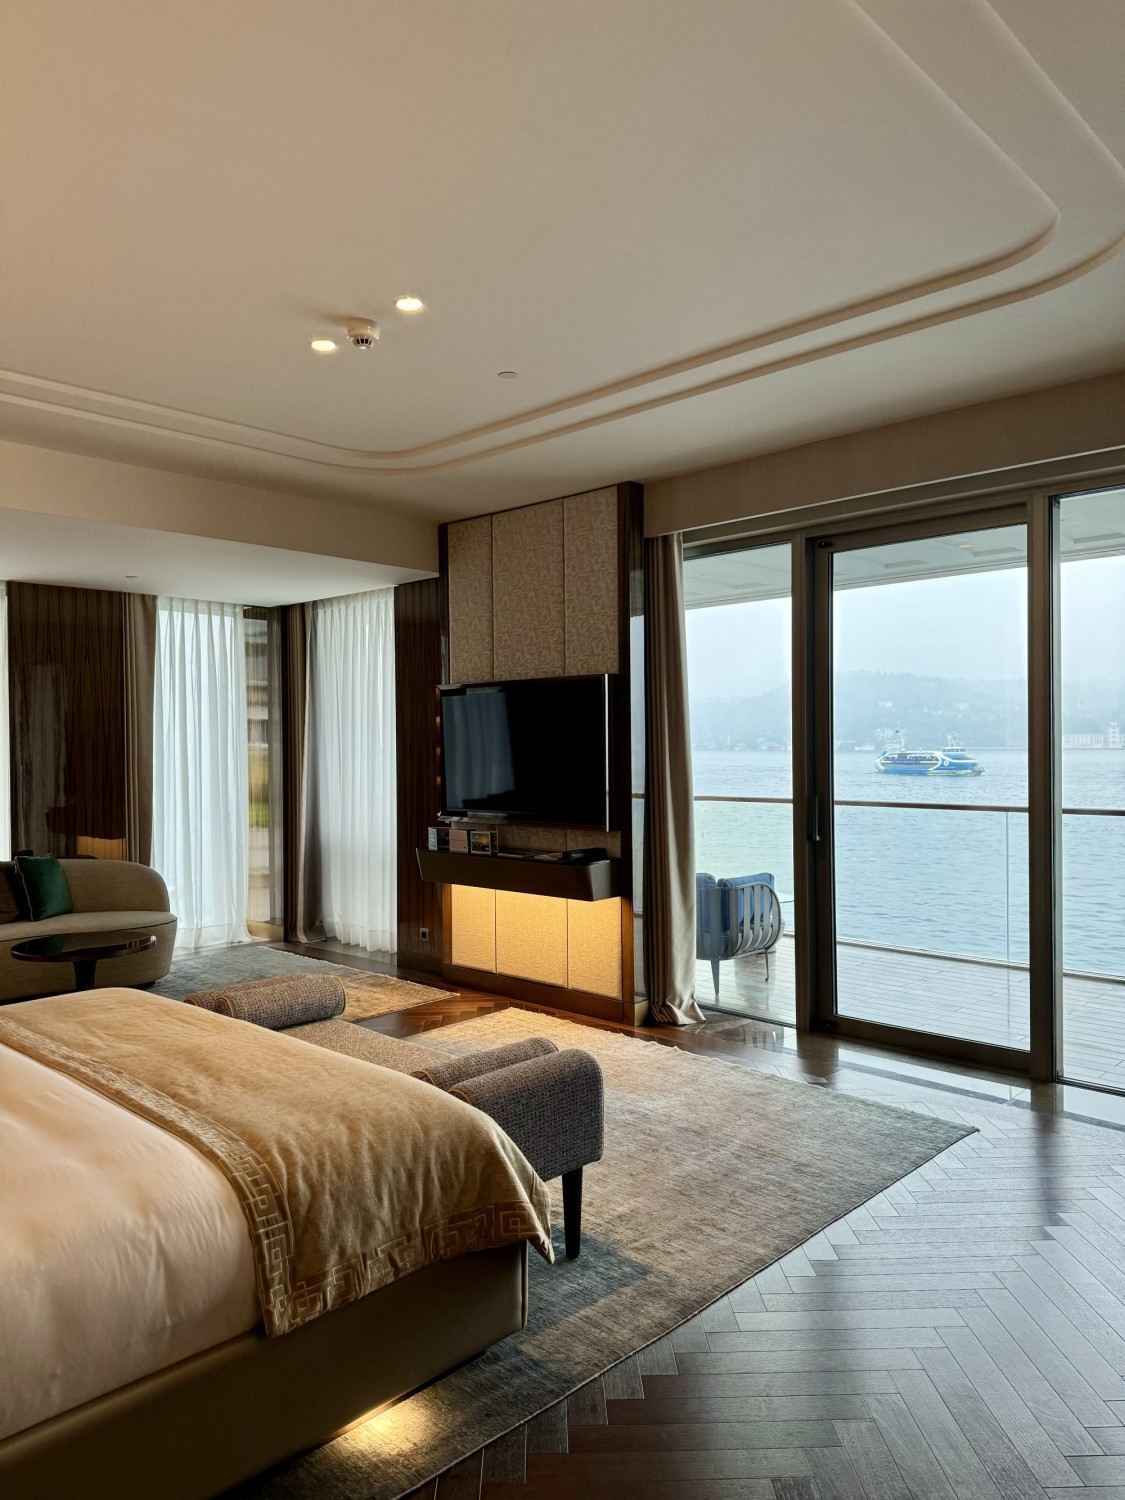 Inside one of the rooms, with a double bed, television, and a view of the Bosphorus straight.